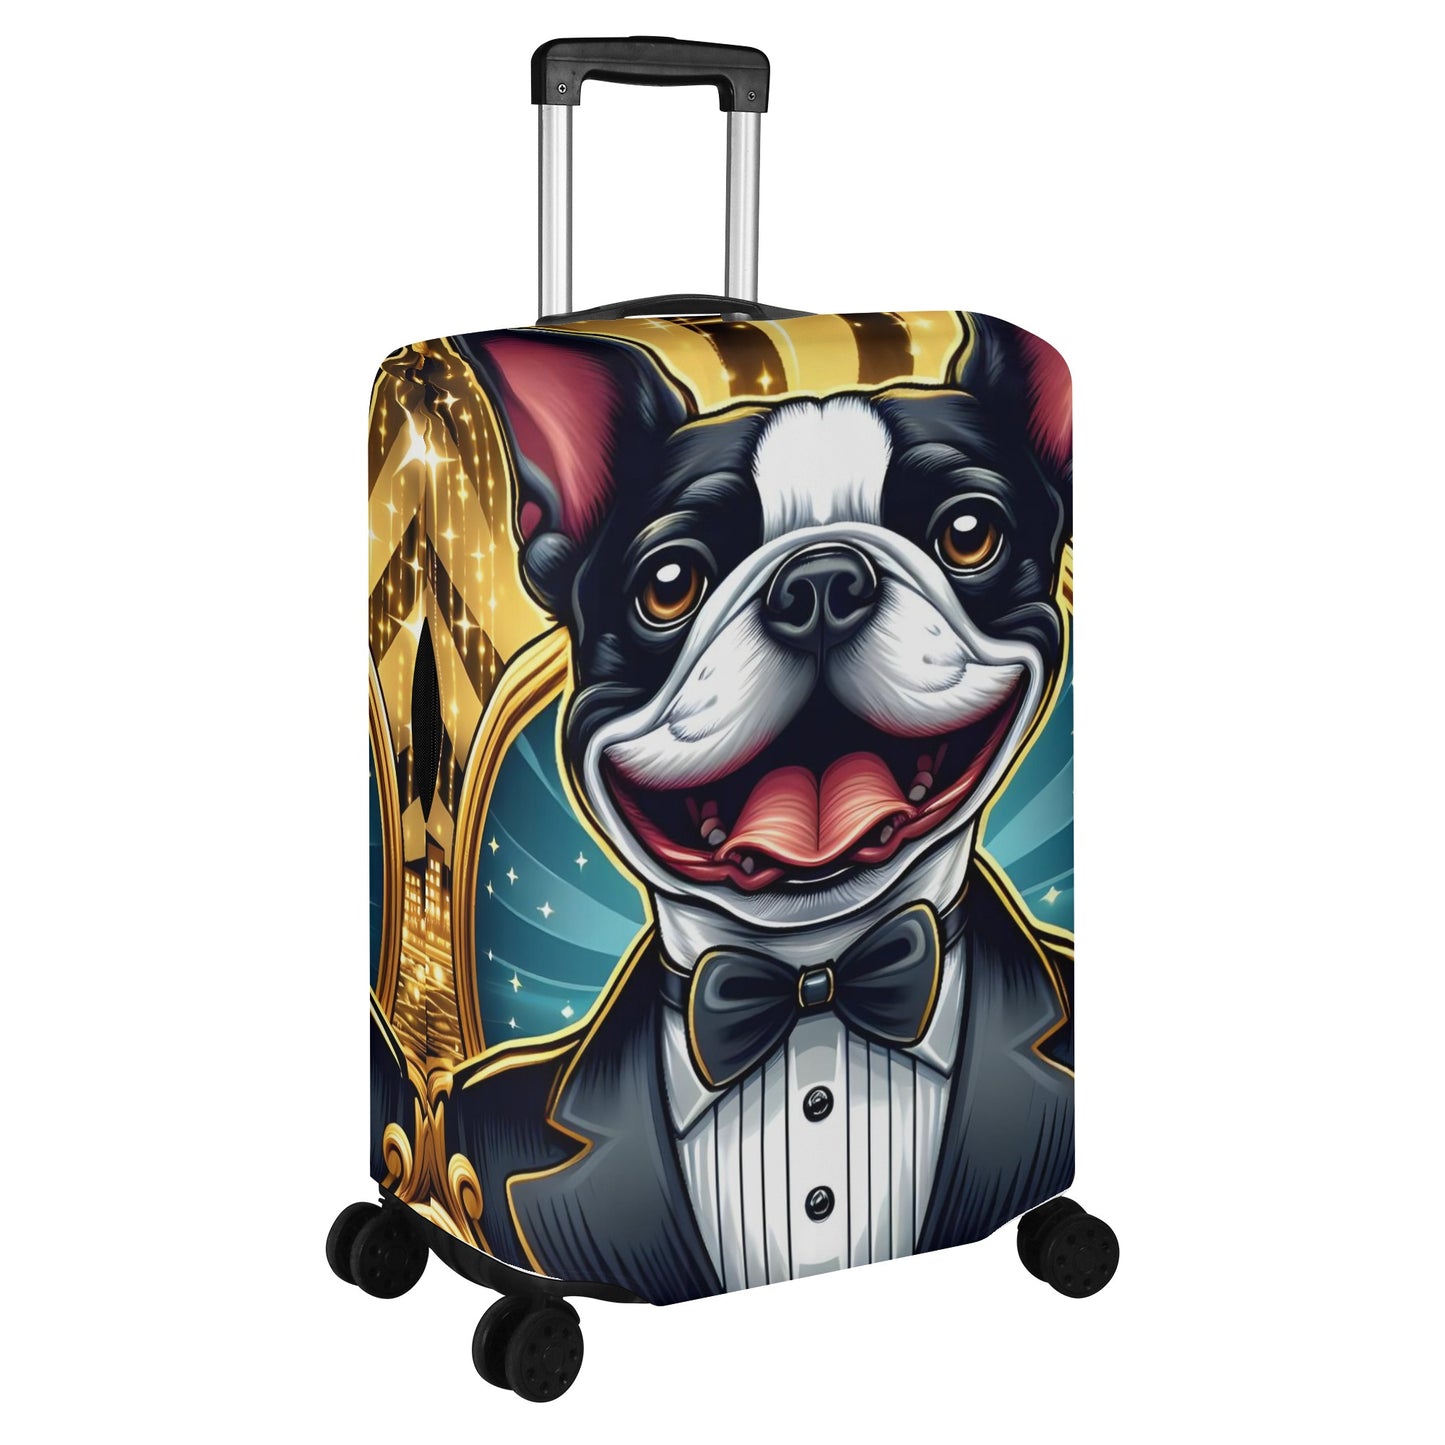 Milo - Luggage Cover for Boston Terrier lovers